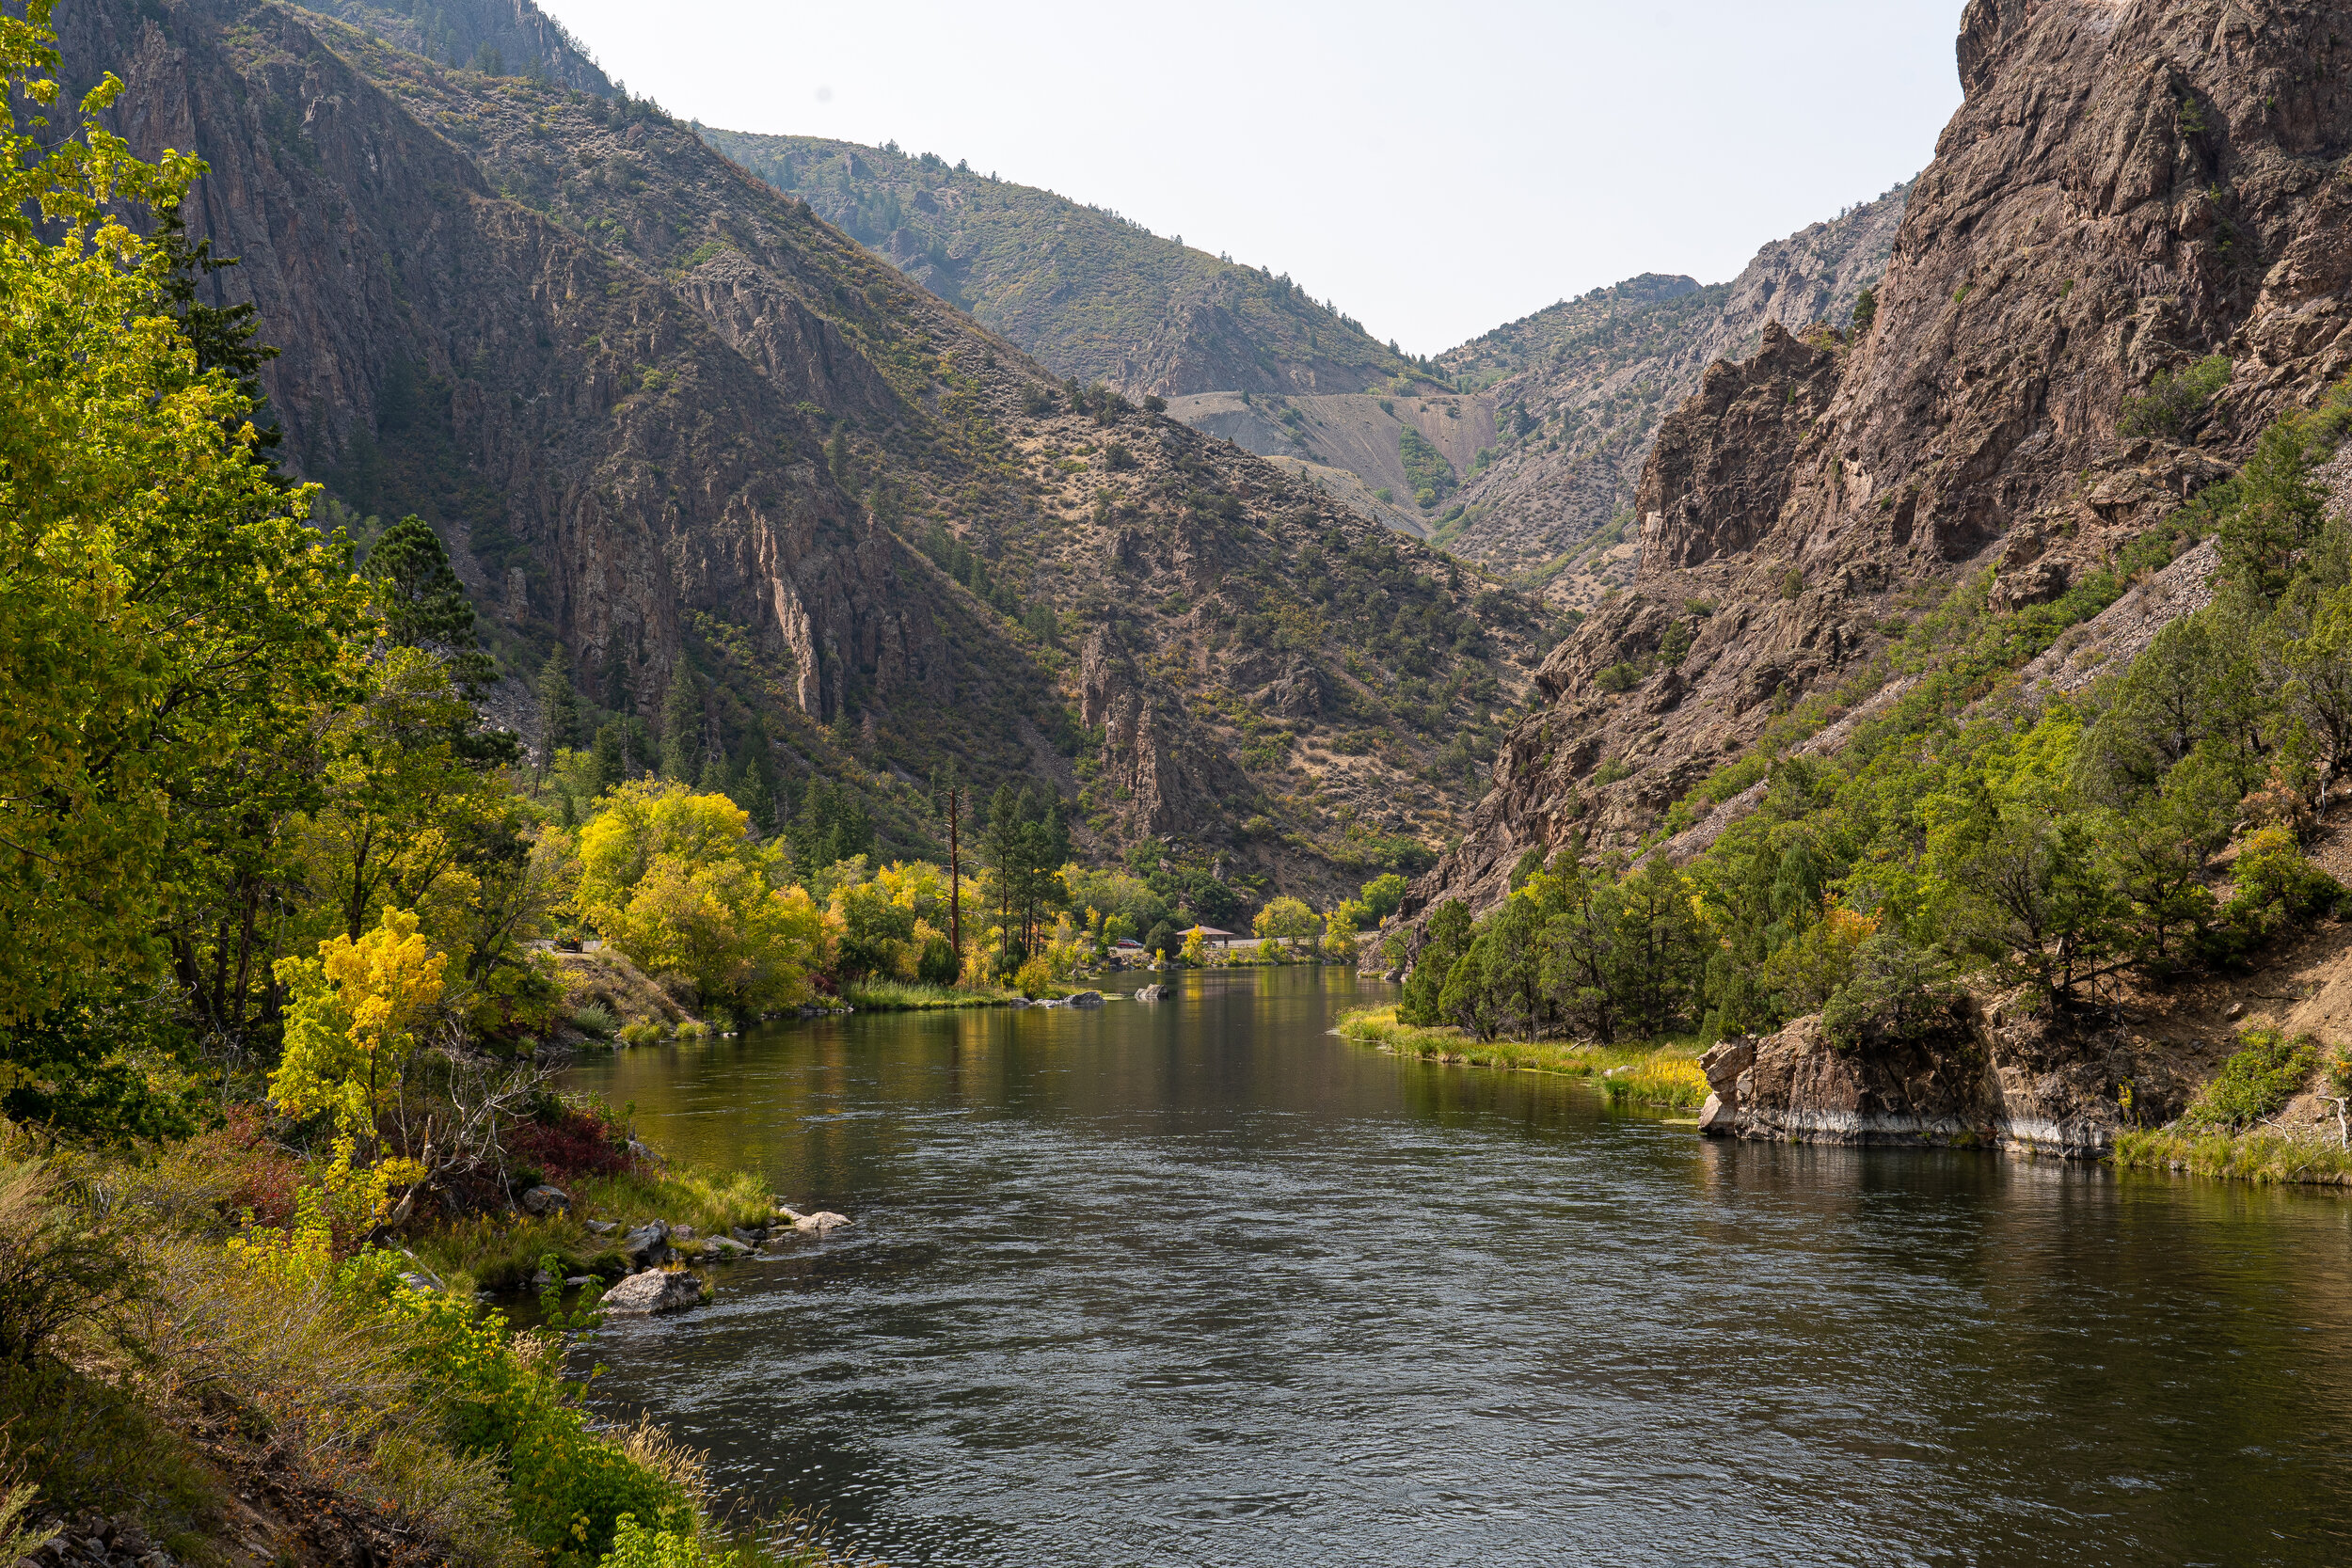  After spending most of the day at the top of Black Canyon, we took a lovely drive to the base of the canyon to see the Gunnison River up close.  